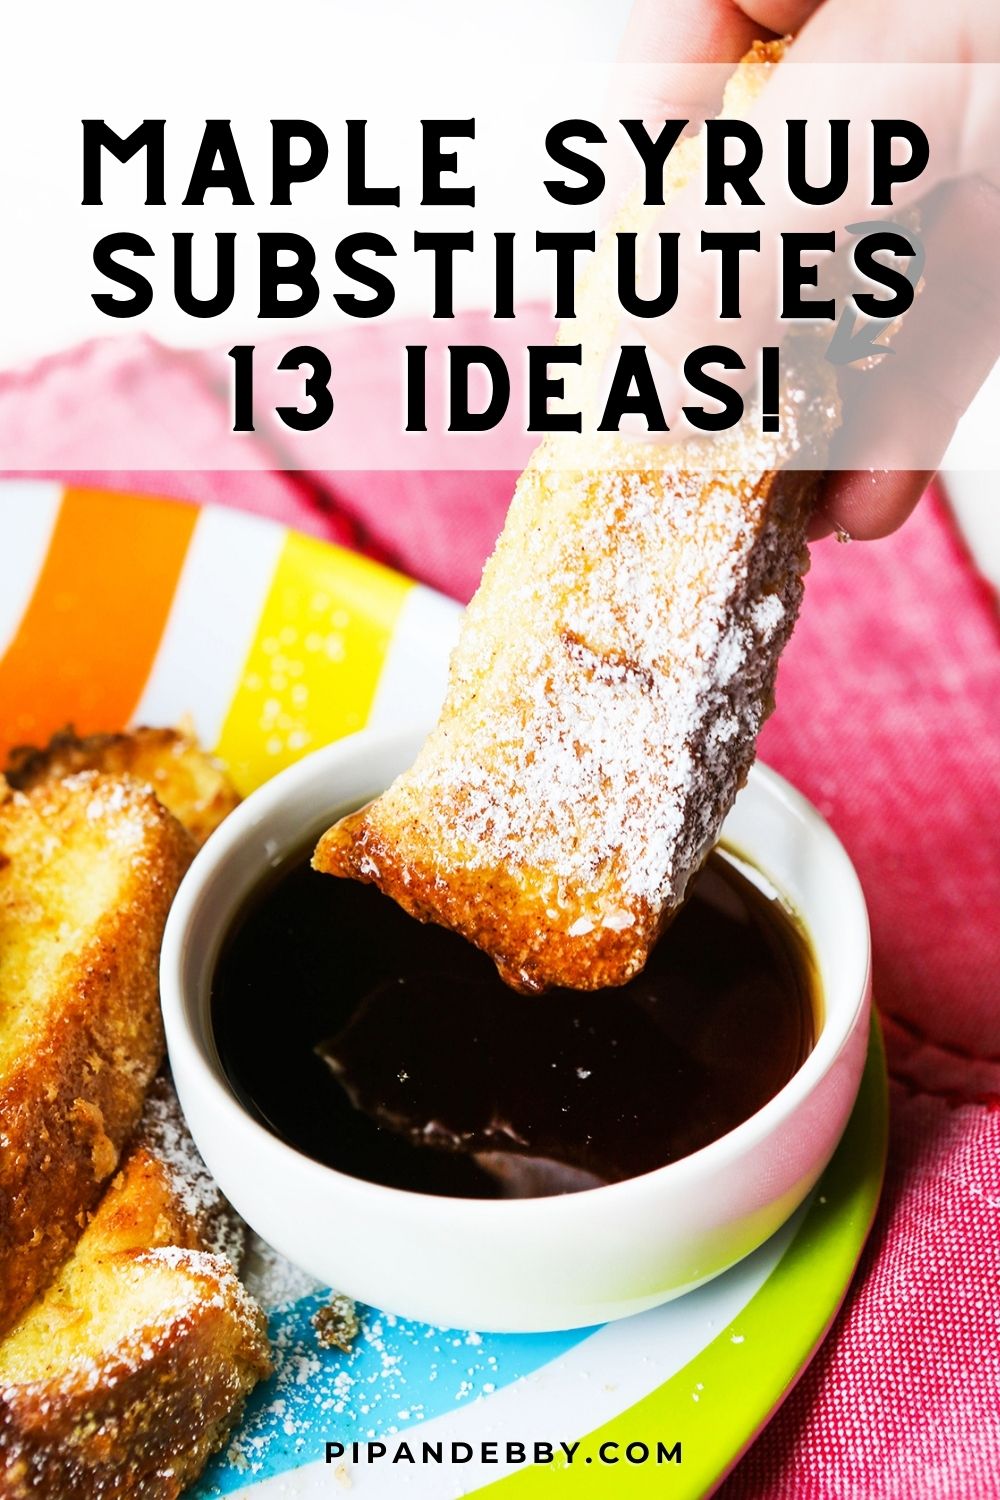 Photo of a french toast stick being dunked in maple syrup with text overlay: "Maple syrup substitutes 13 ideas!"